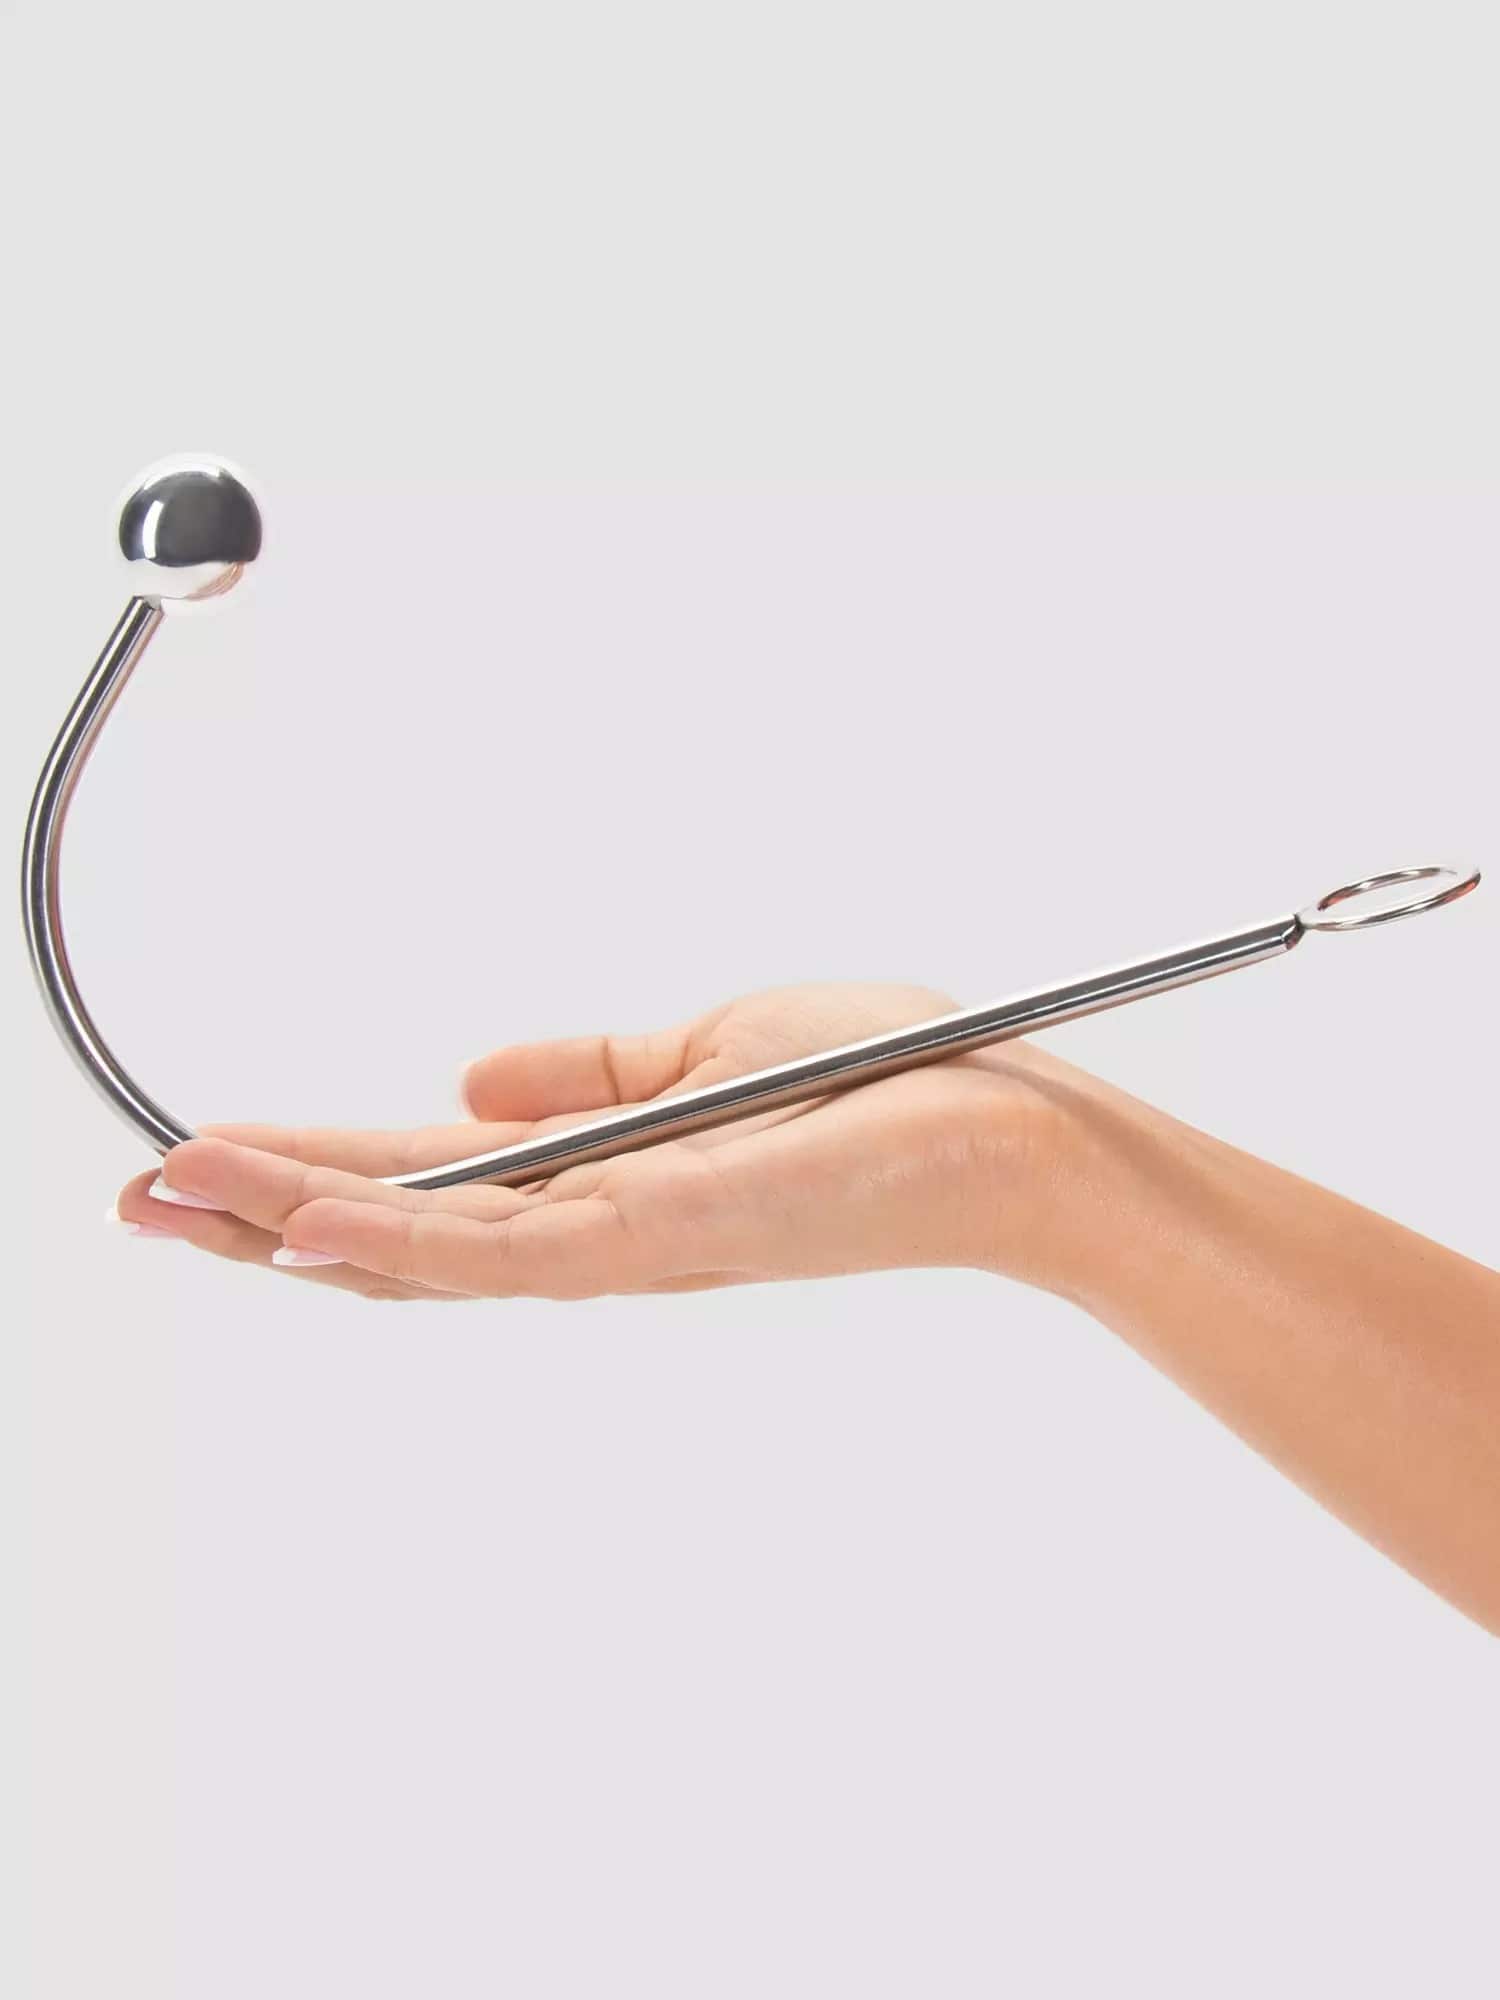 Product DOMINIX Deluxe Small Anal Hook